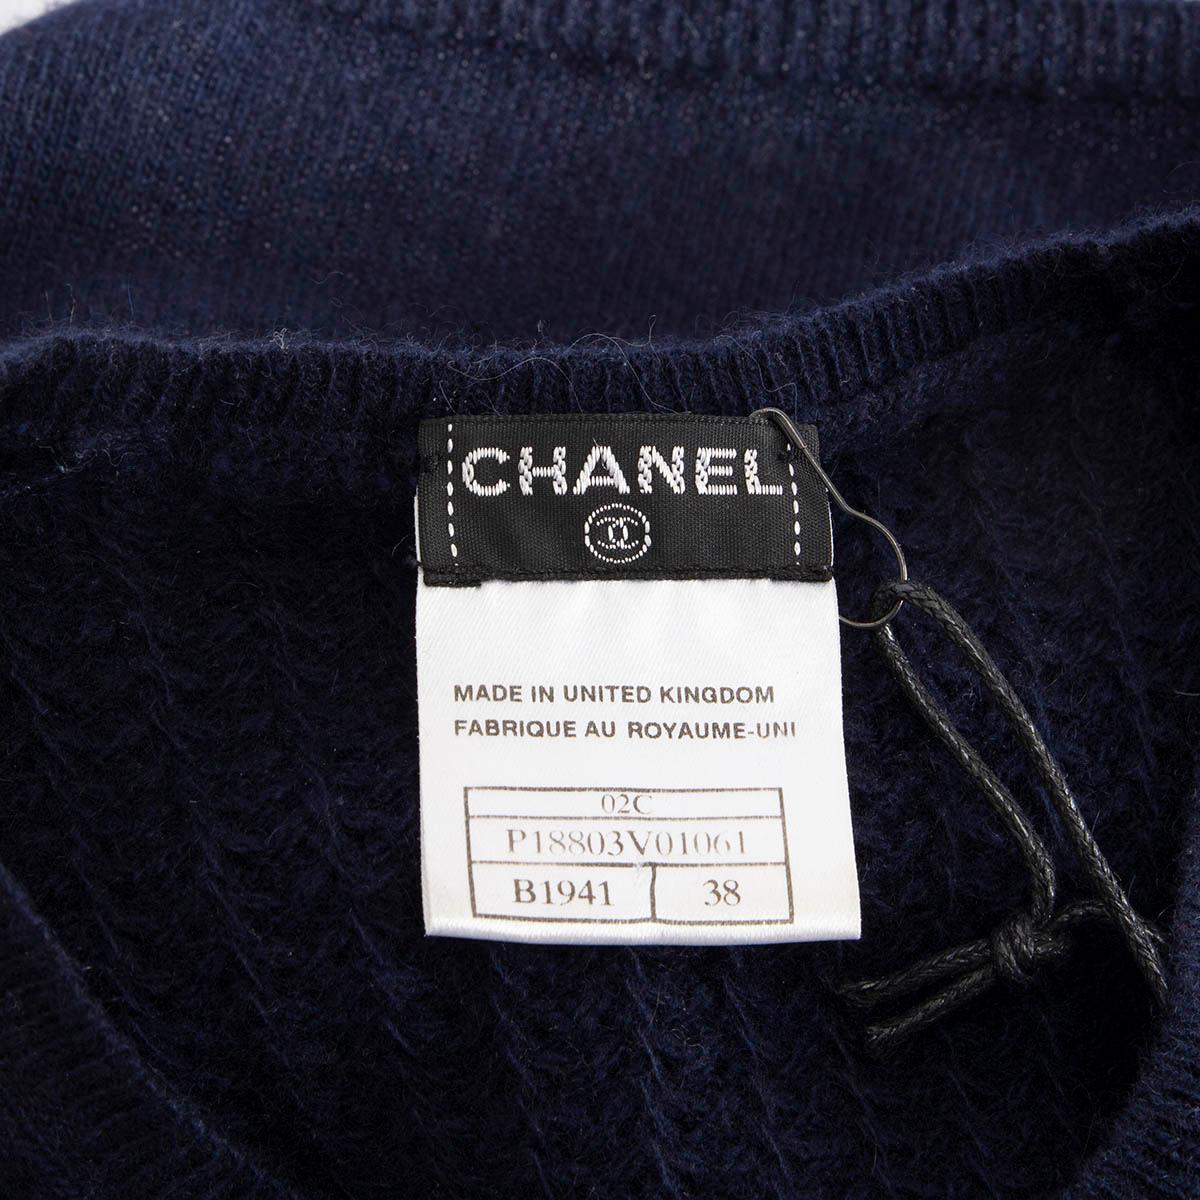 CHANEL navy blue cashmere 2002 SLEEVELESS BELTED KNIT TOP Shirt 38 S For Sale 4